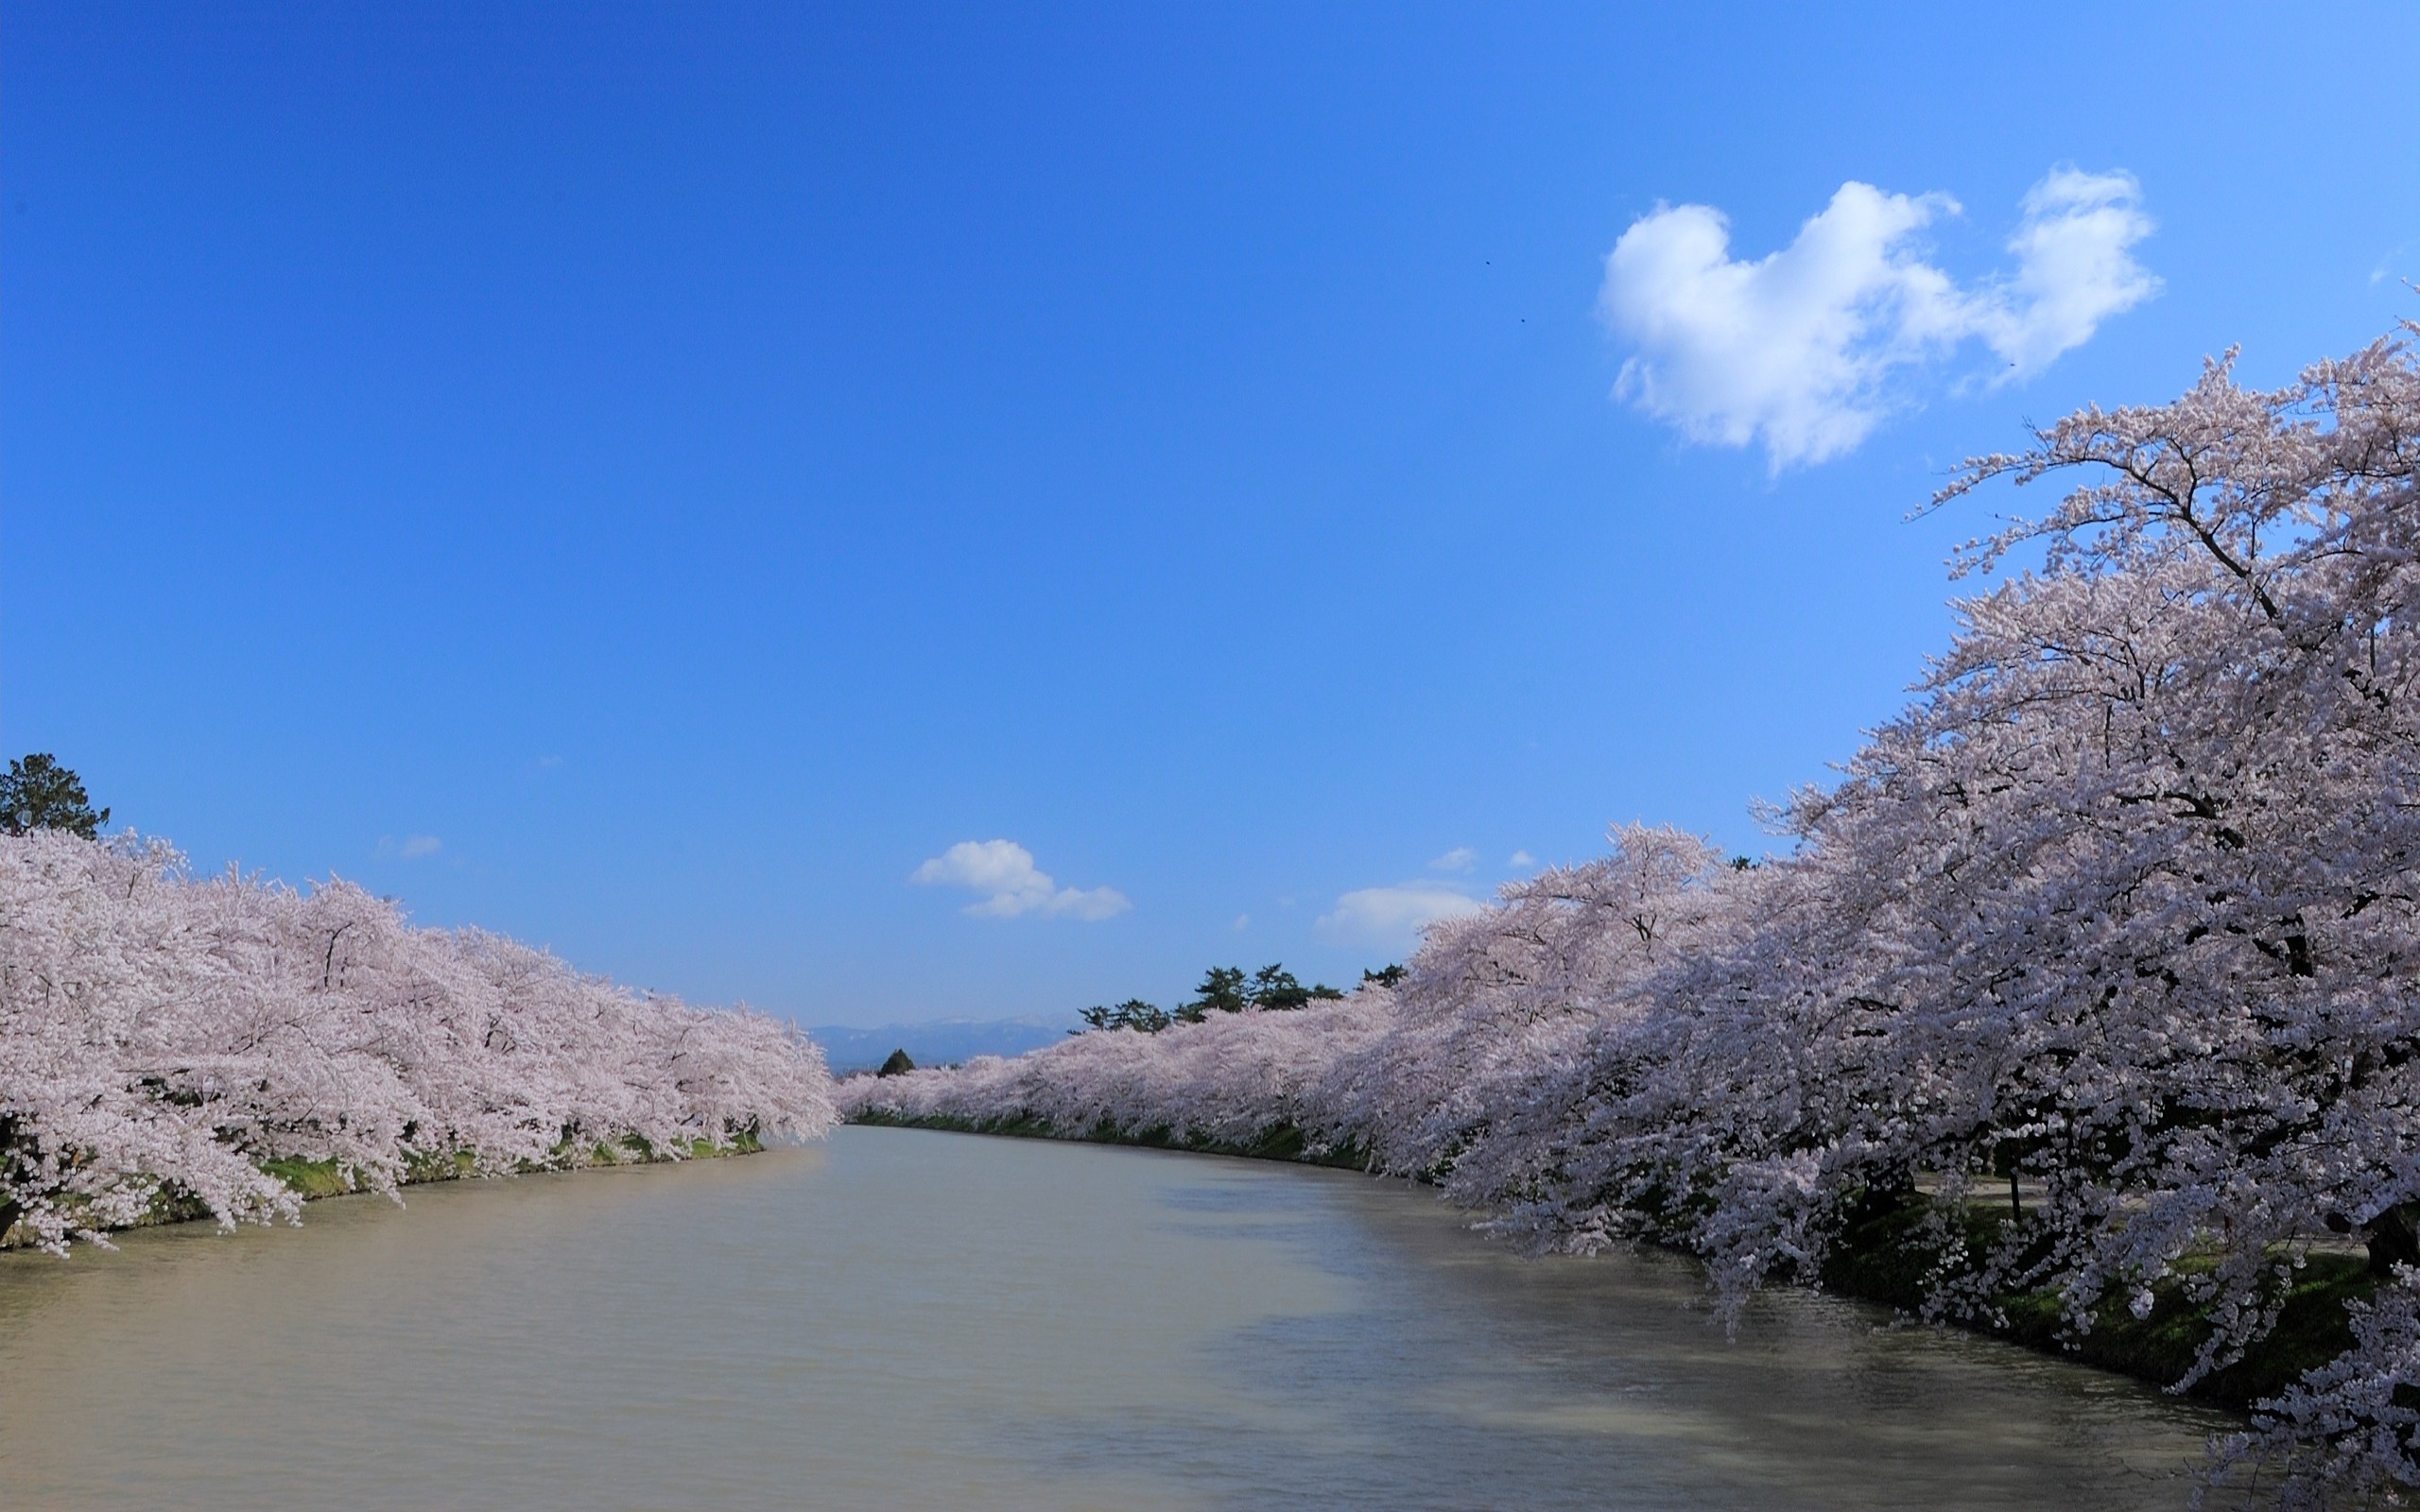 Flowering trees along the river